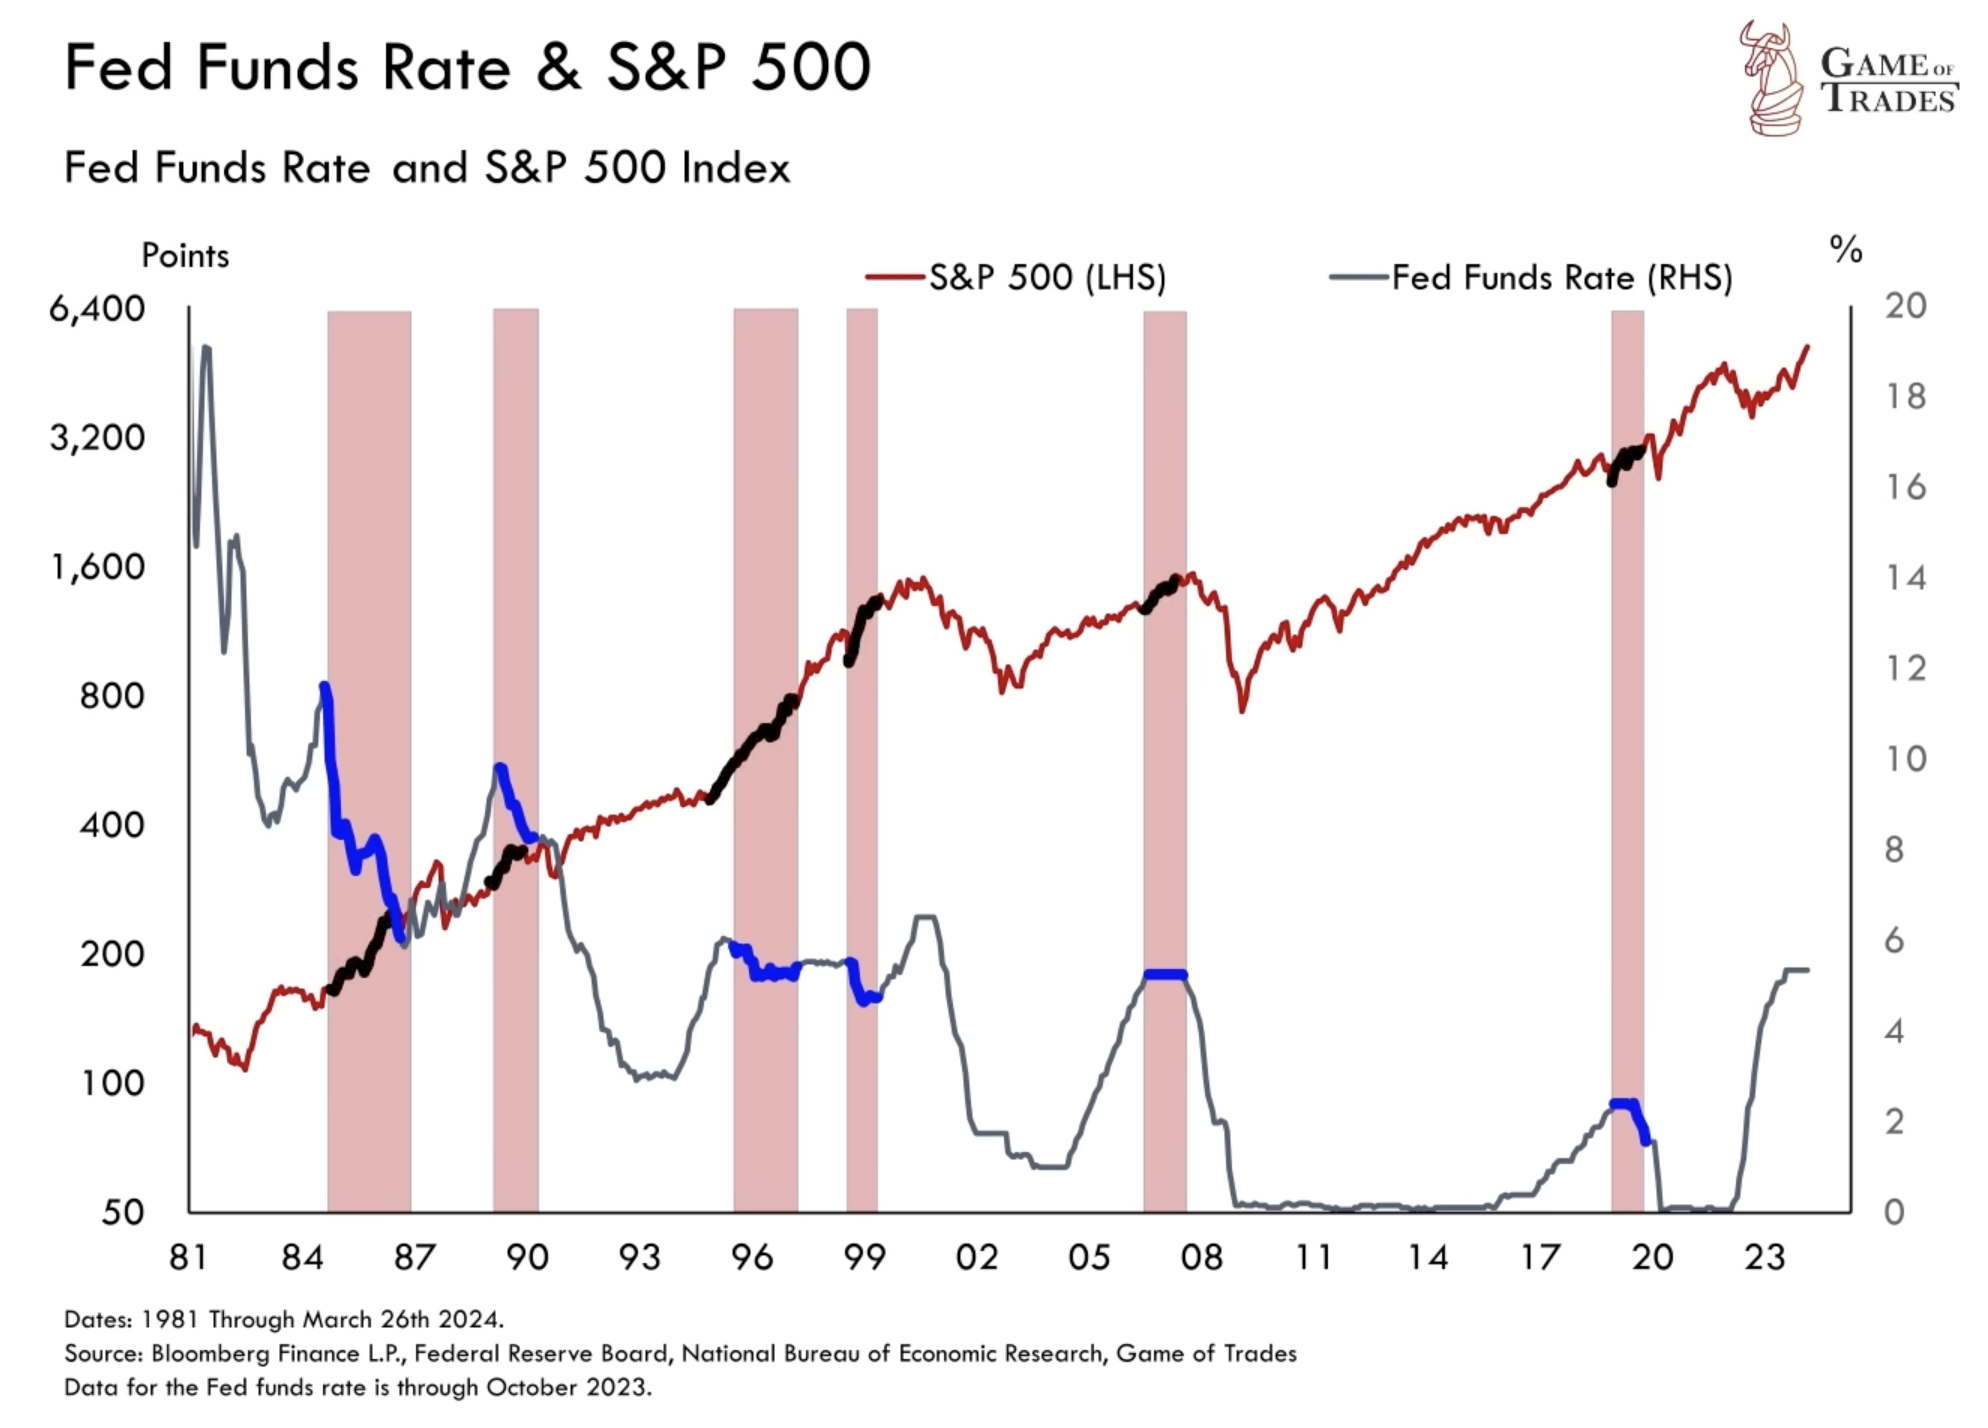 Fed Funds Rate & S&P 500